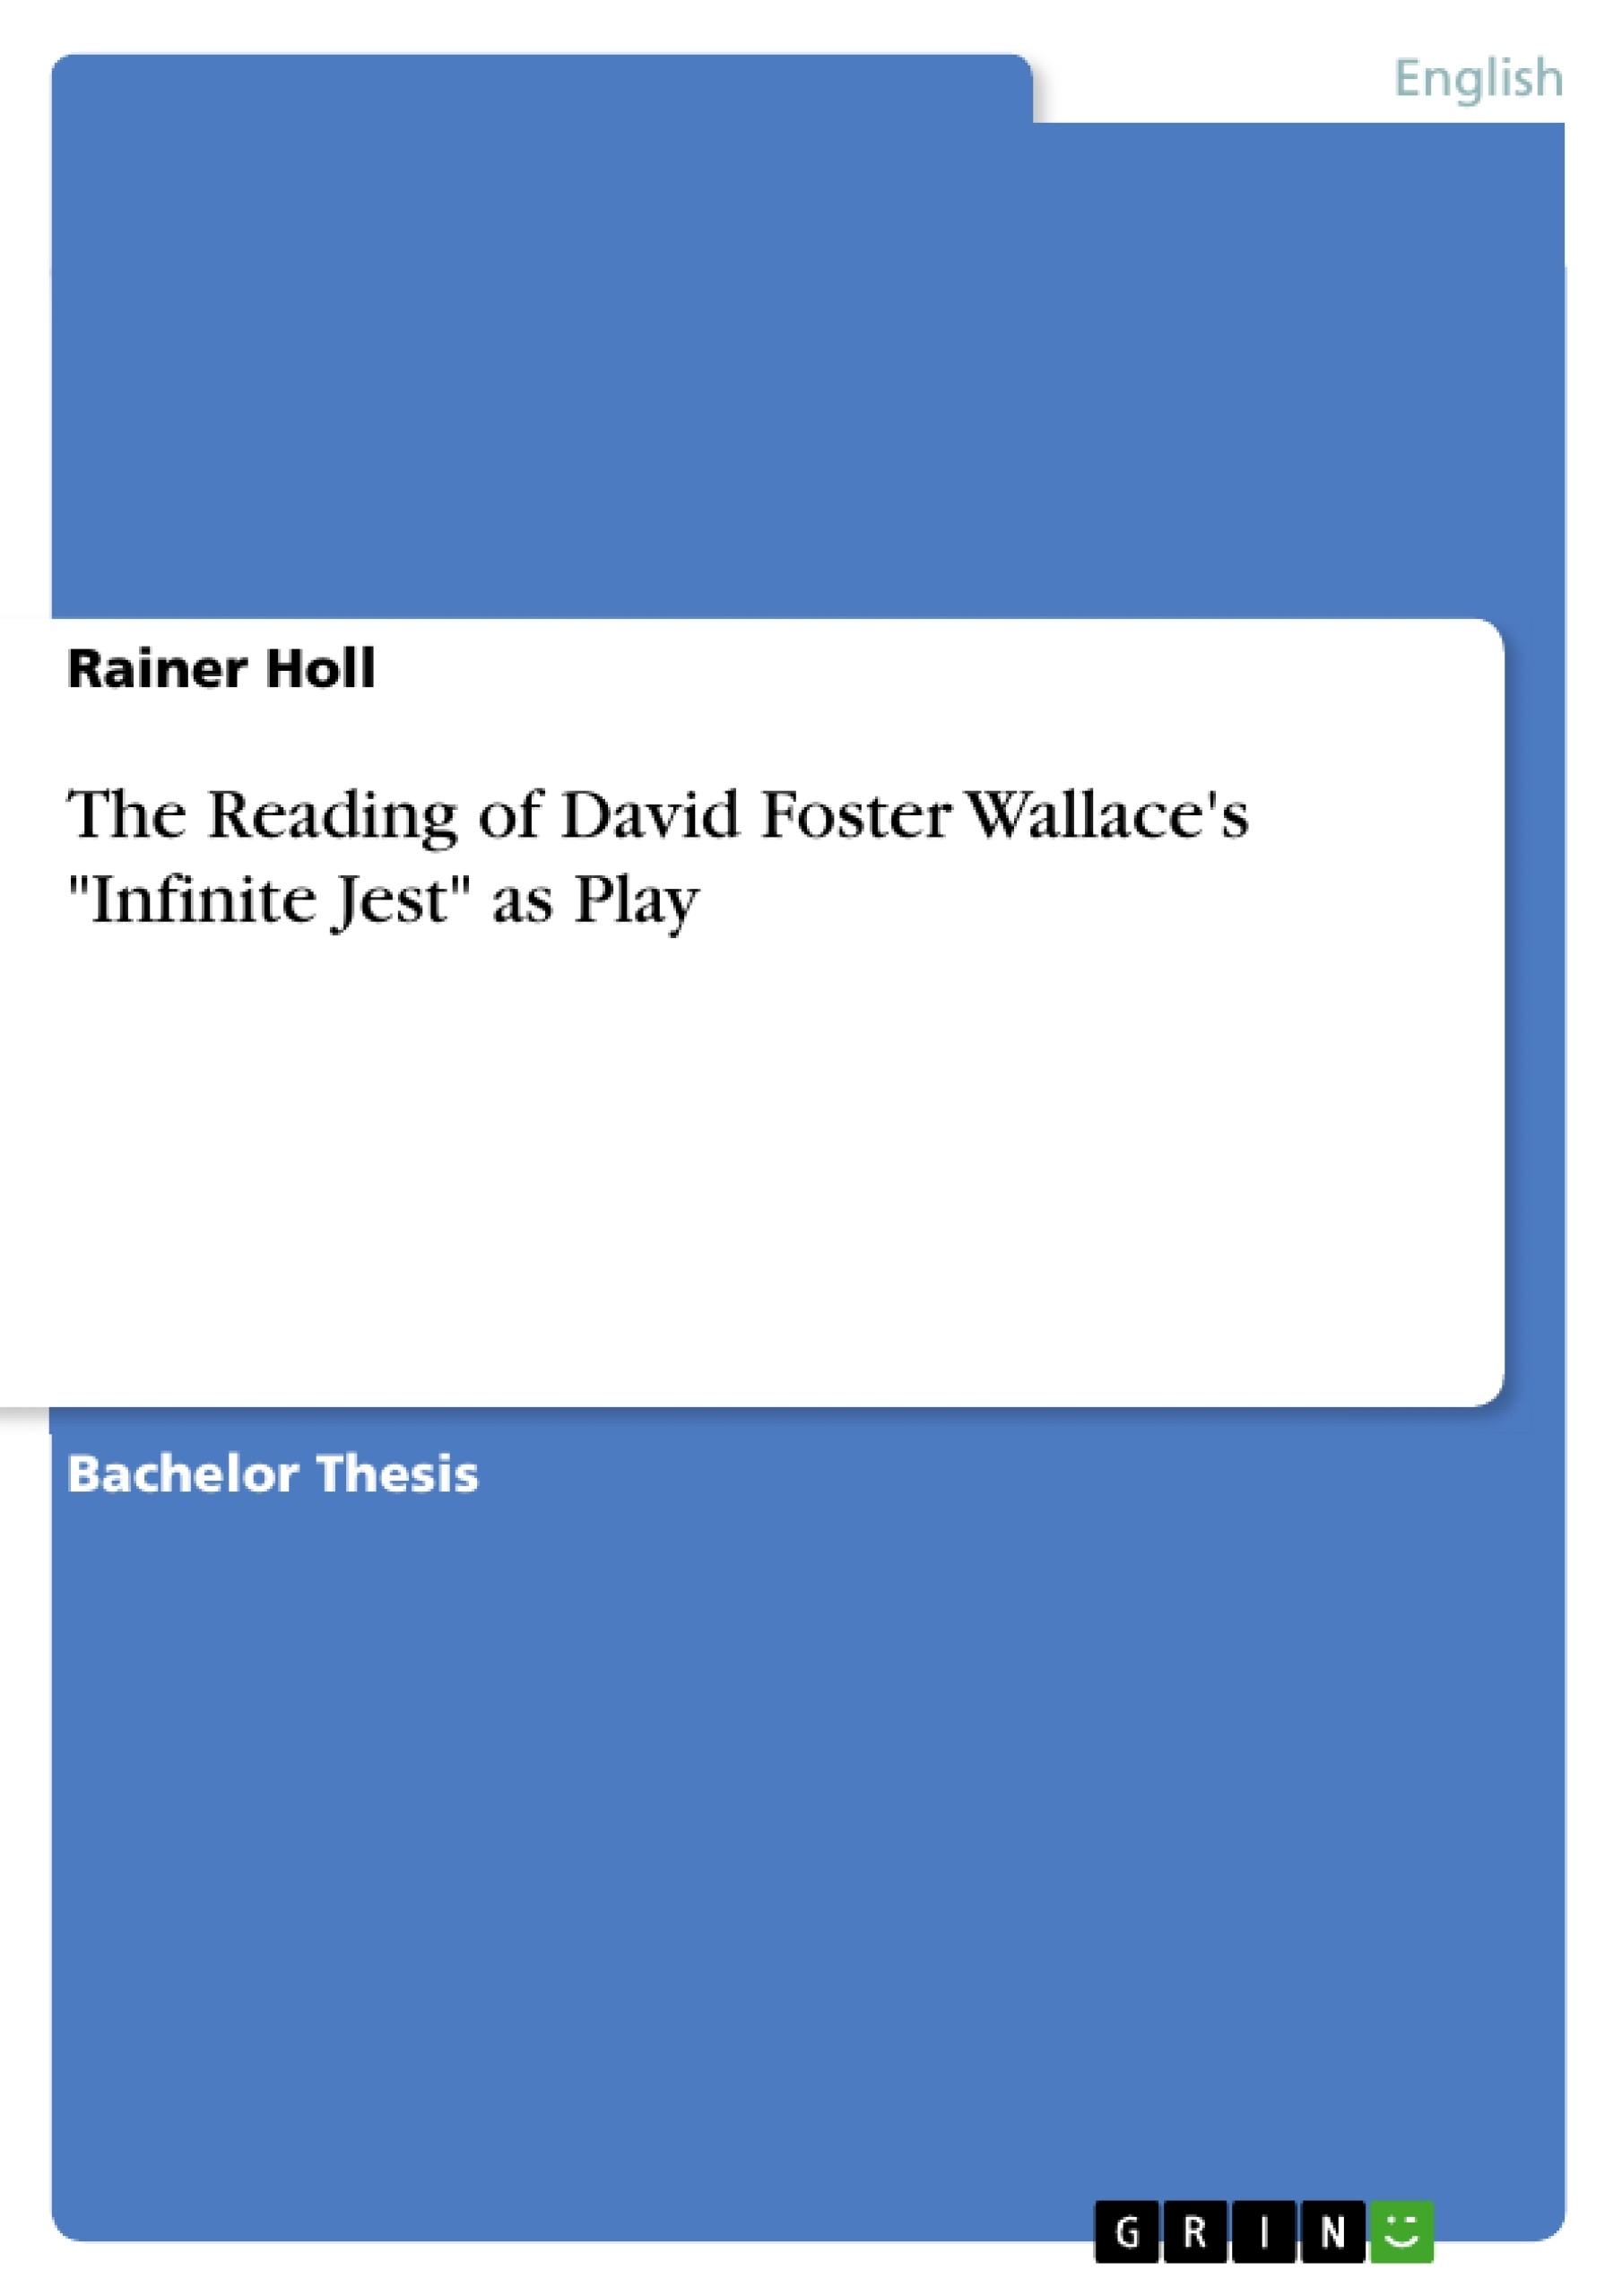 The Reading of David Foster Wallace's Infinite Jest as Play - GRIN